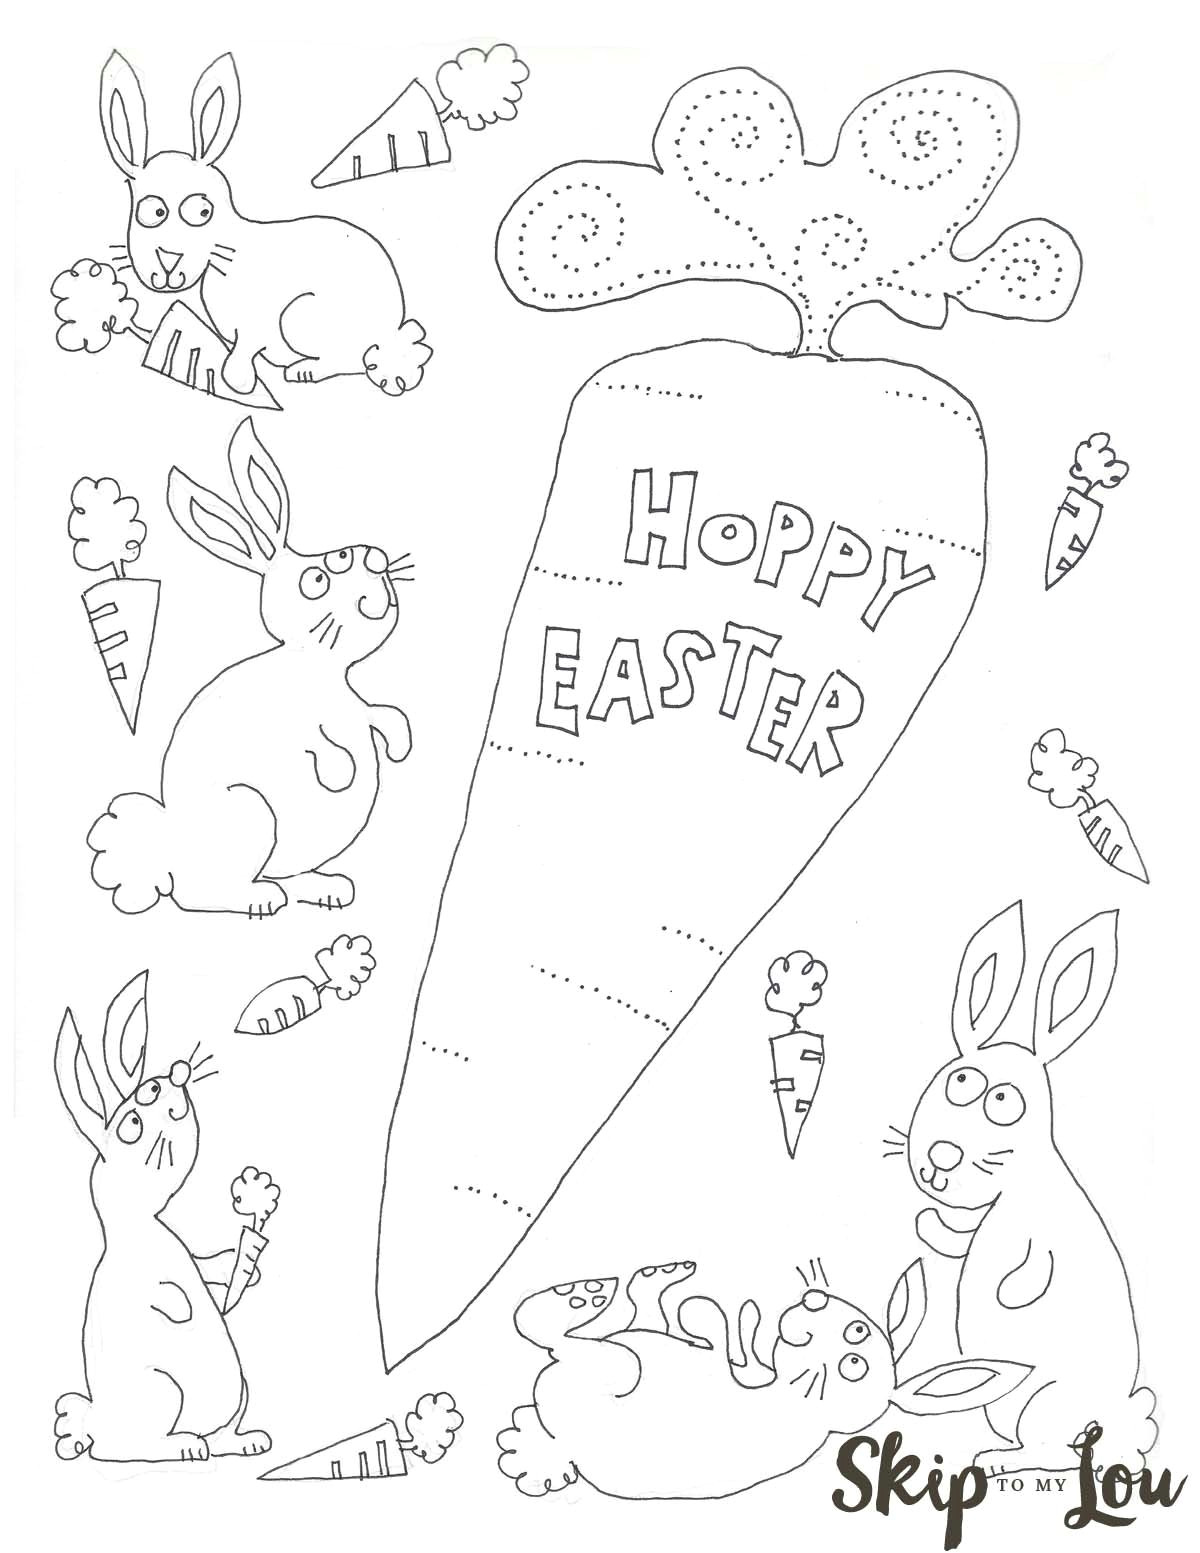 free printable bunnies coloring page for easter perfect for the children s table